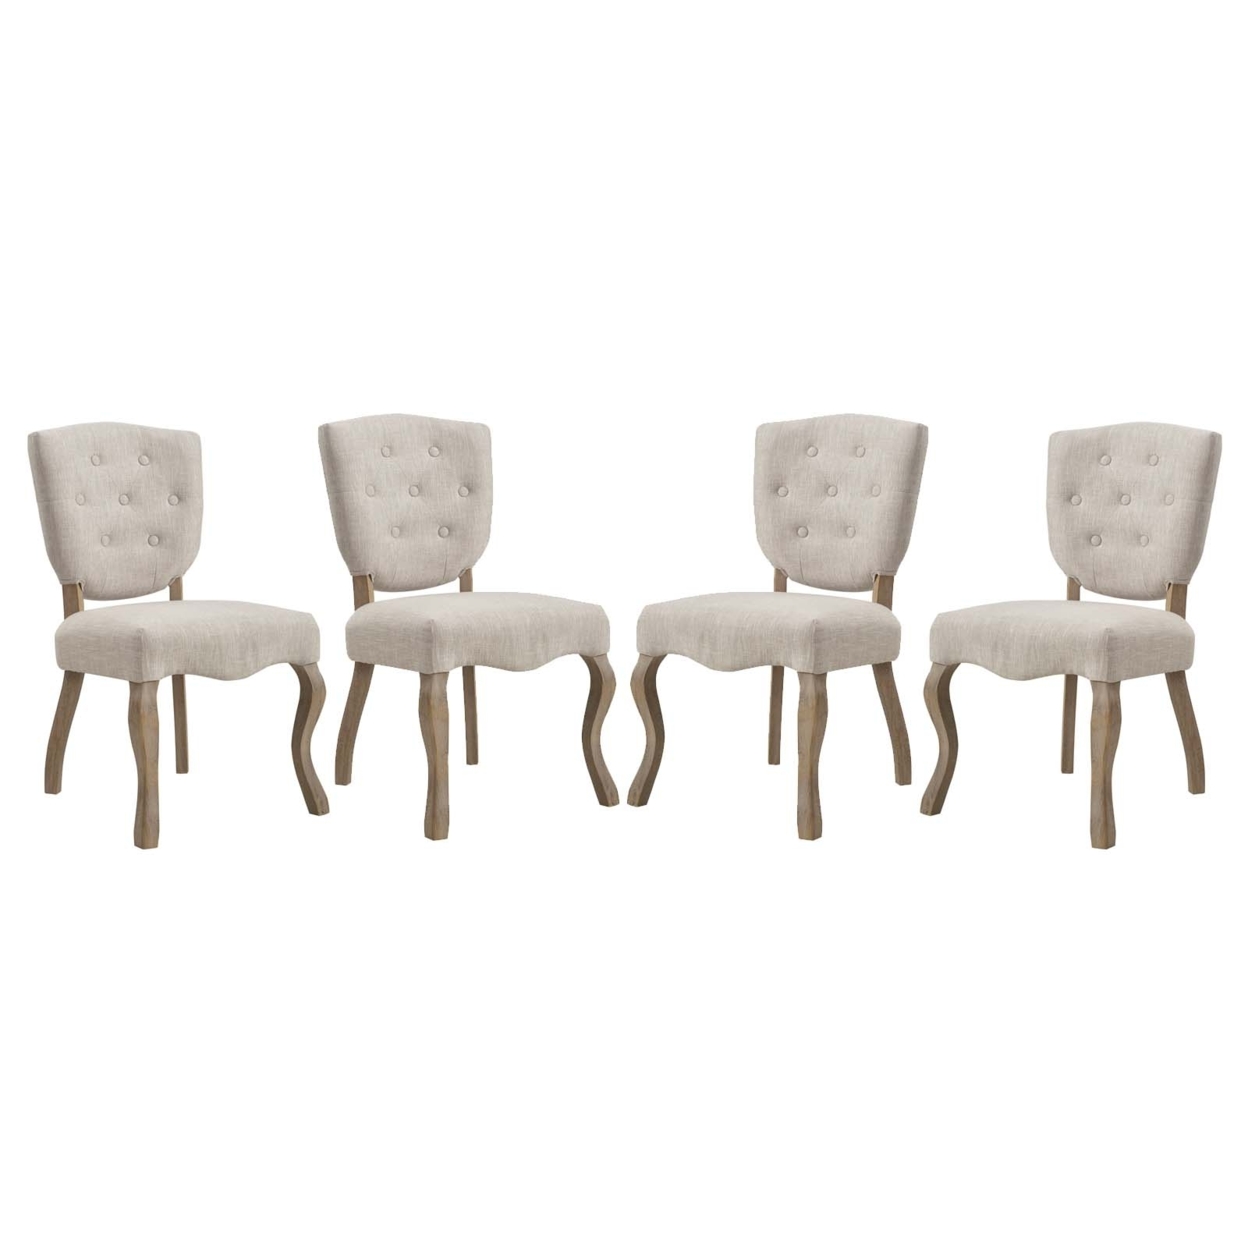 Array Dining Side Chair Set Of 4, Beige